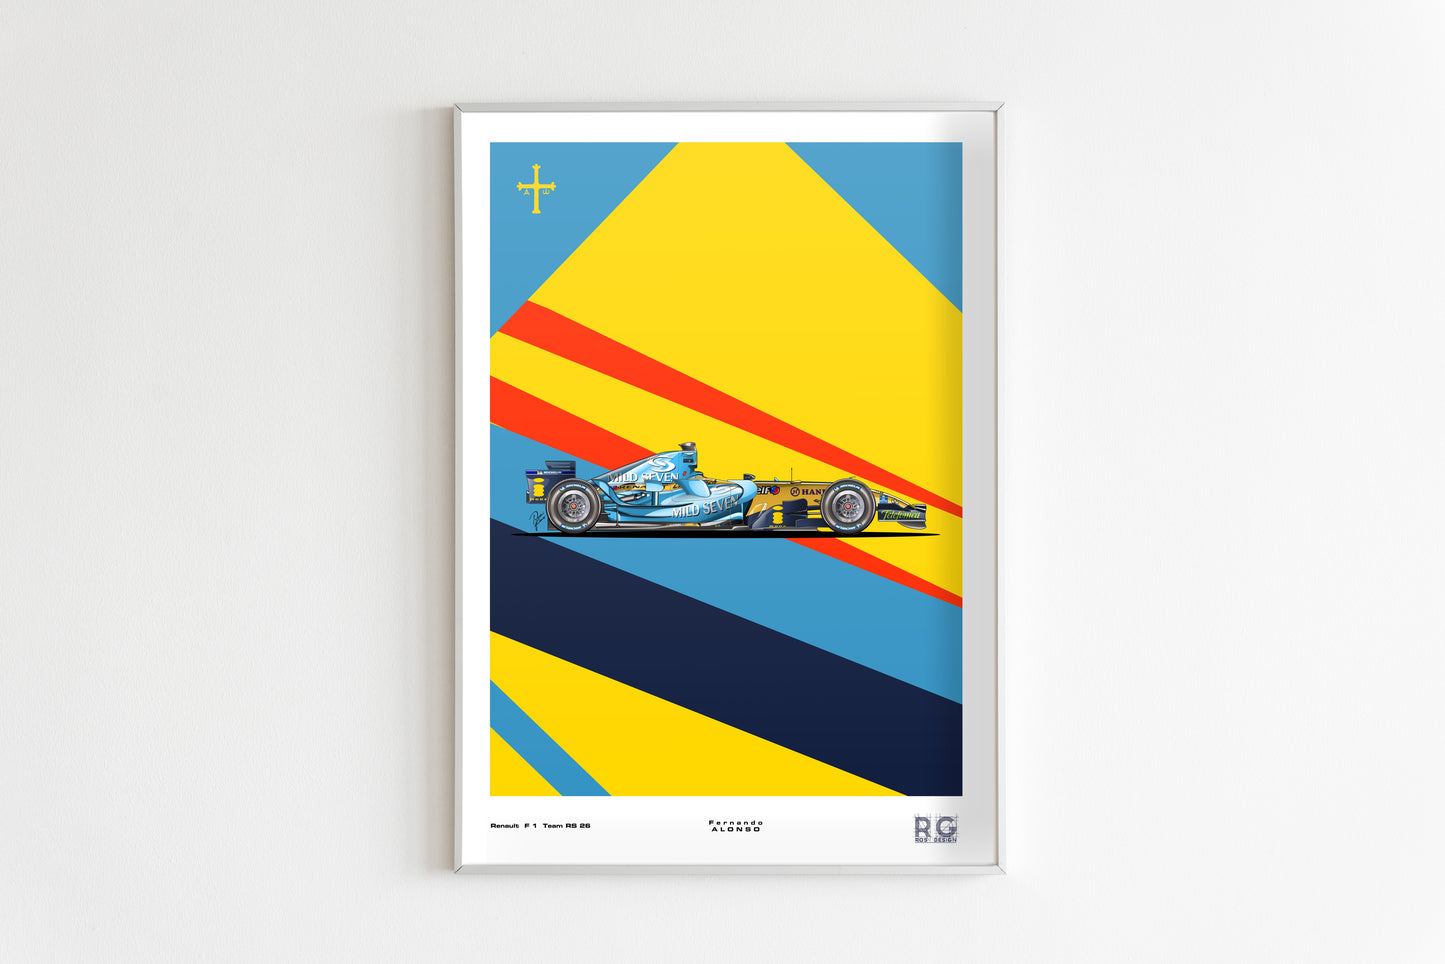 Fernando Alonso 2006 Renault RS26 - Poster vertical A2/A3